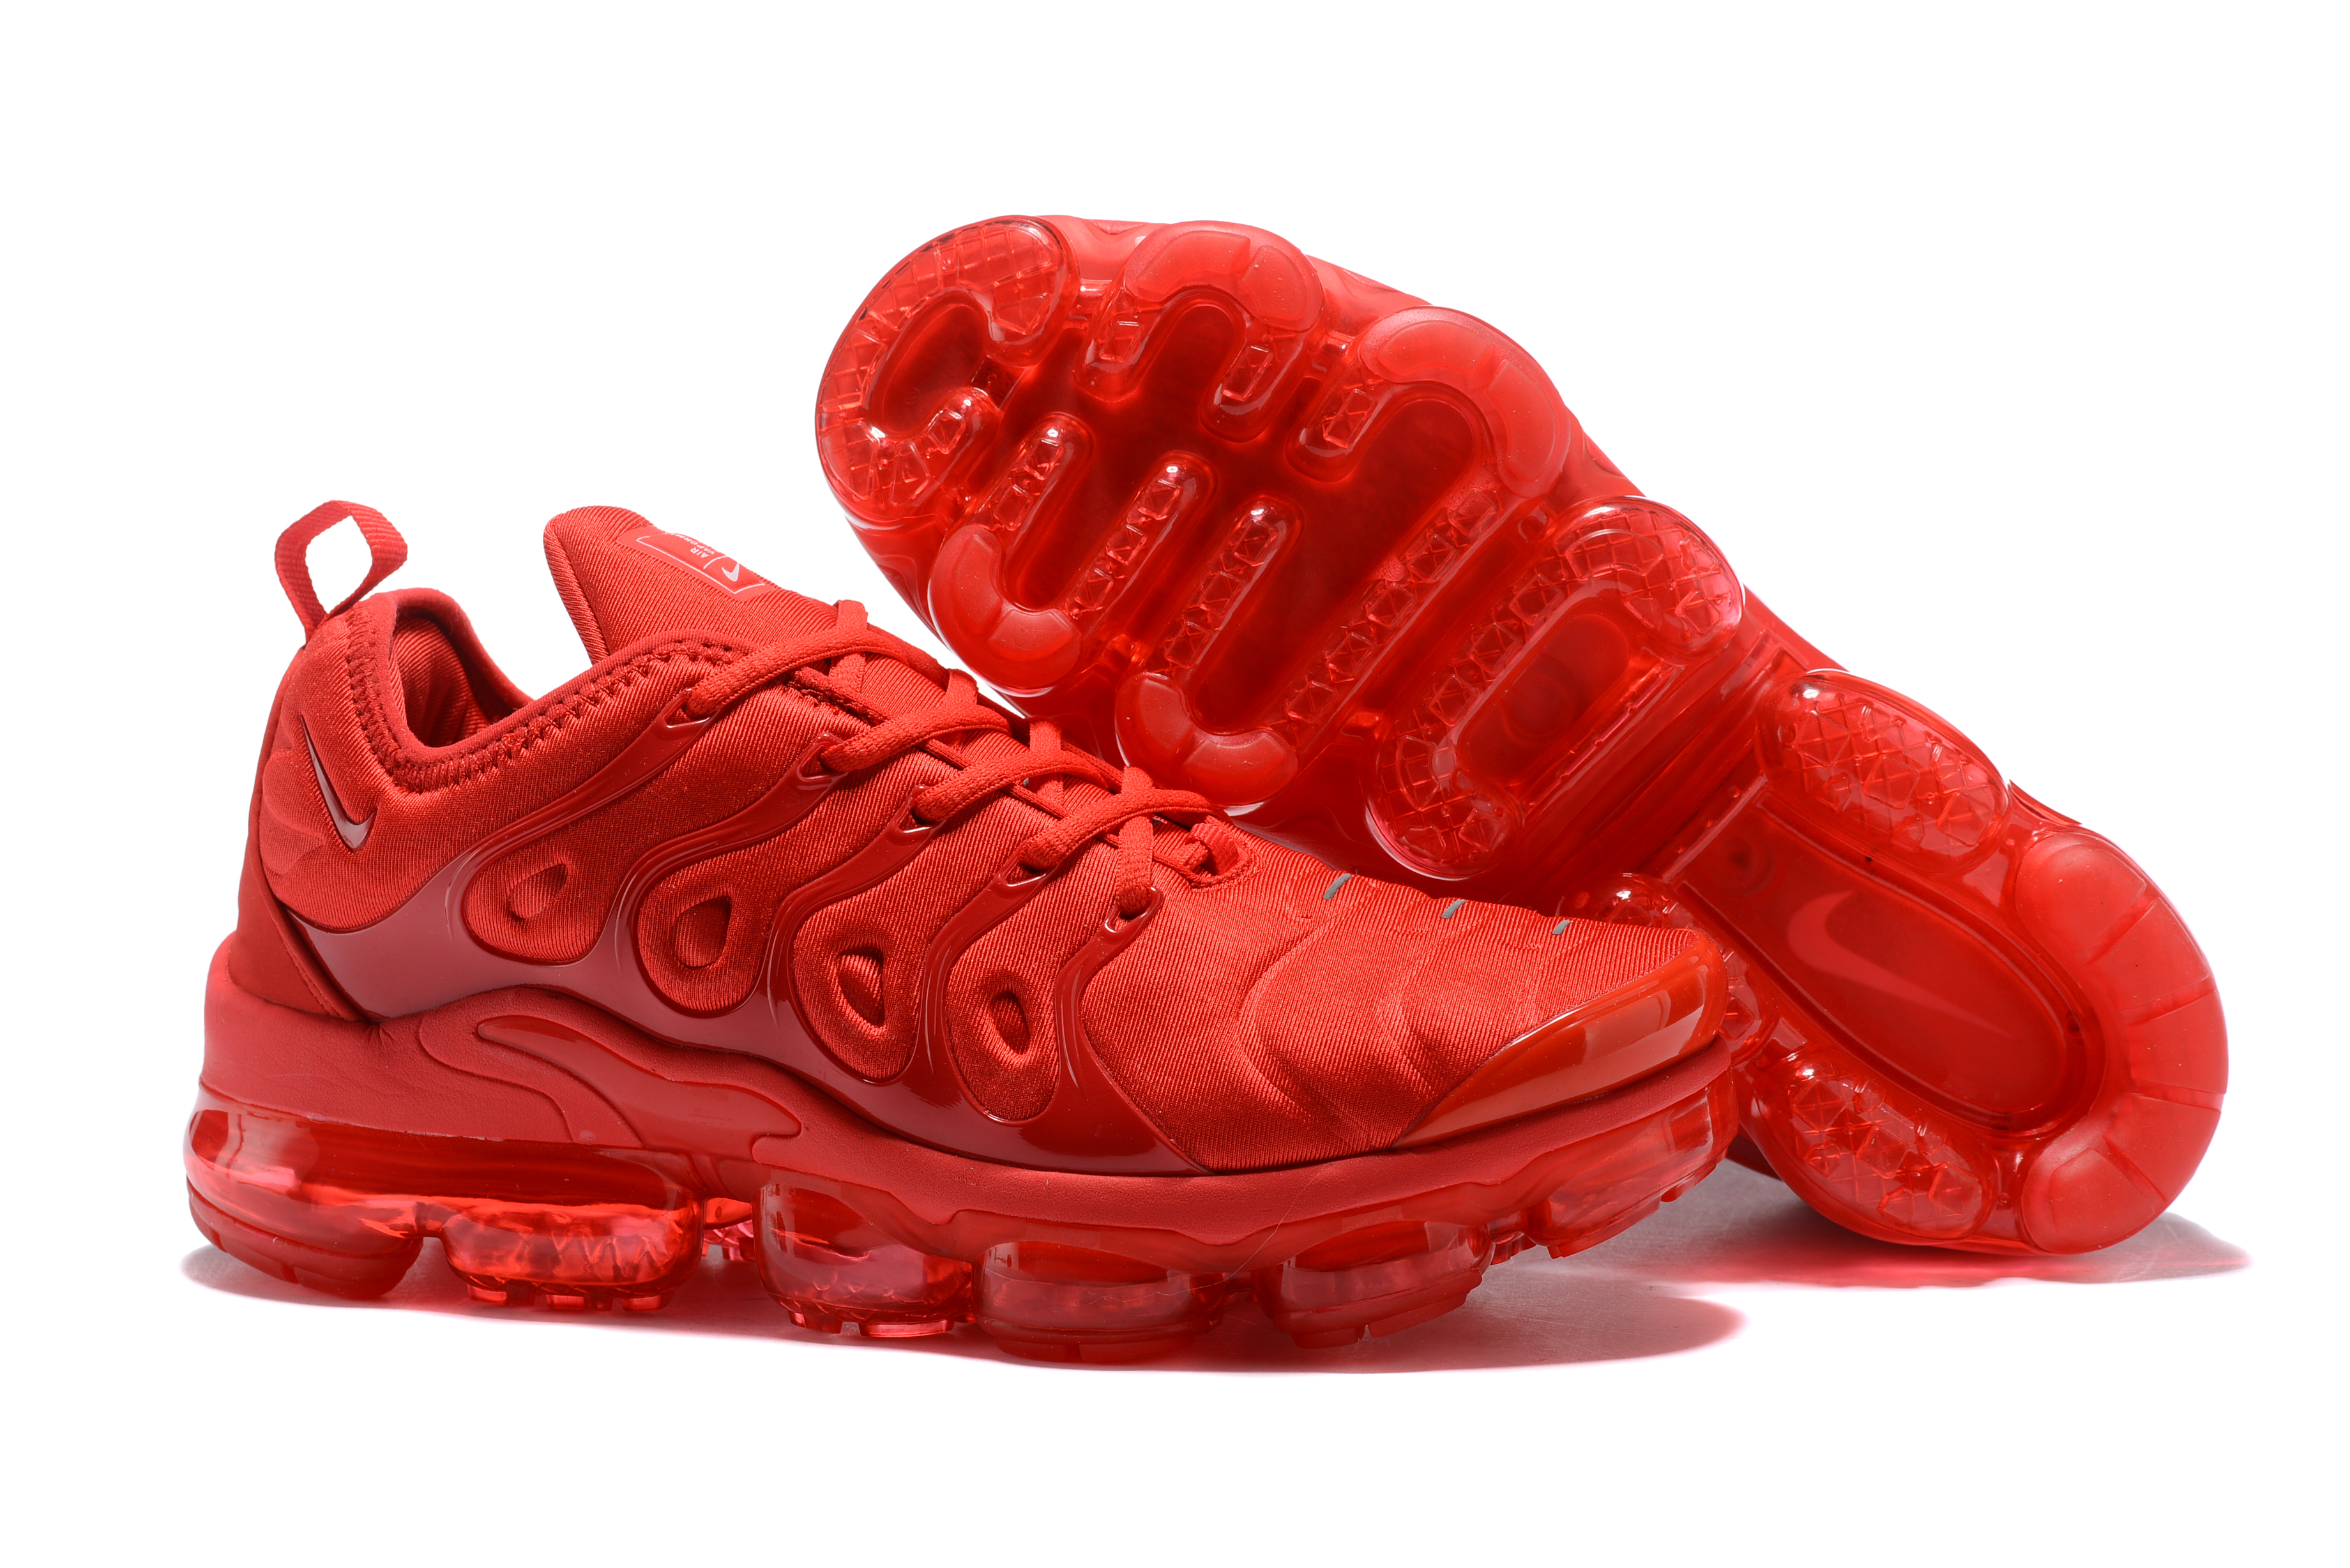 2018 Nike Air Max TN Plus All Red Lover Shoes